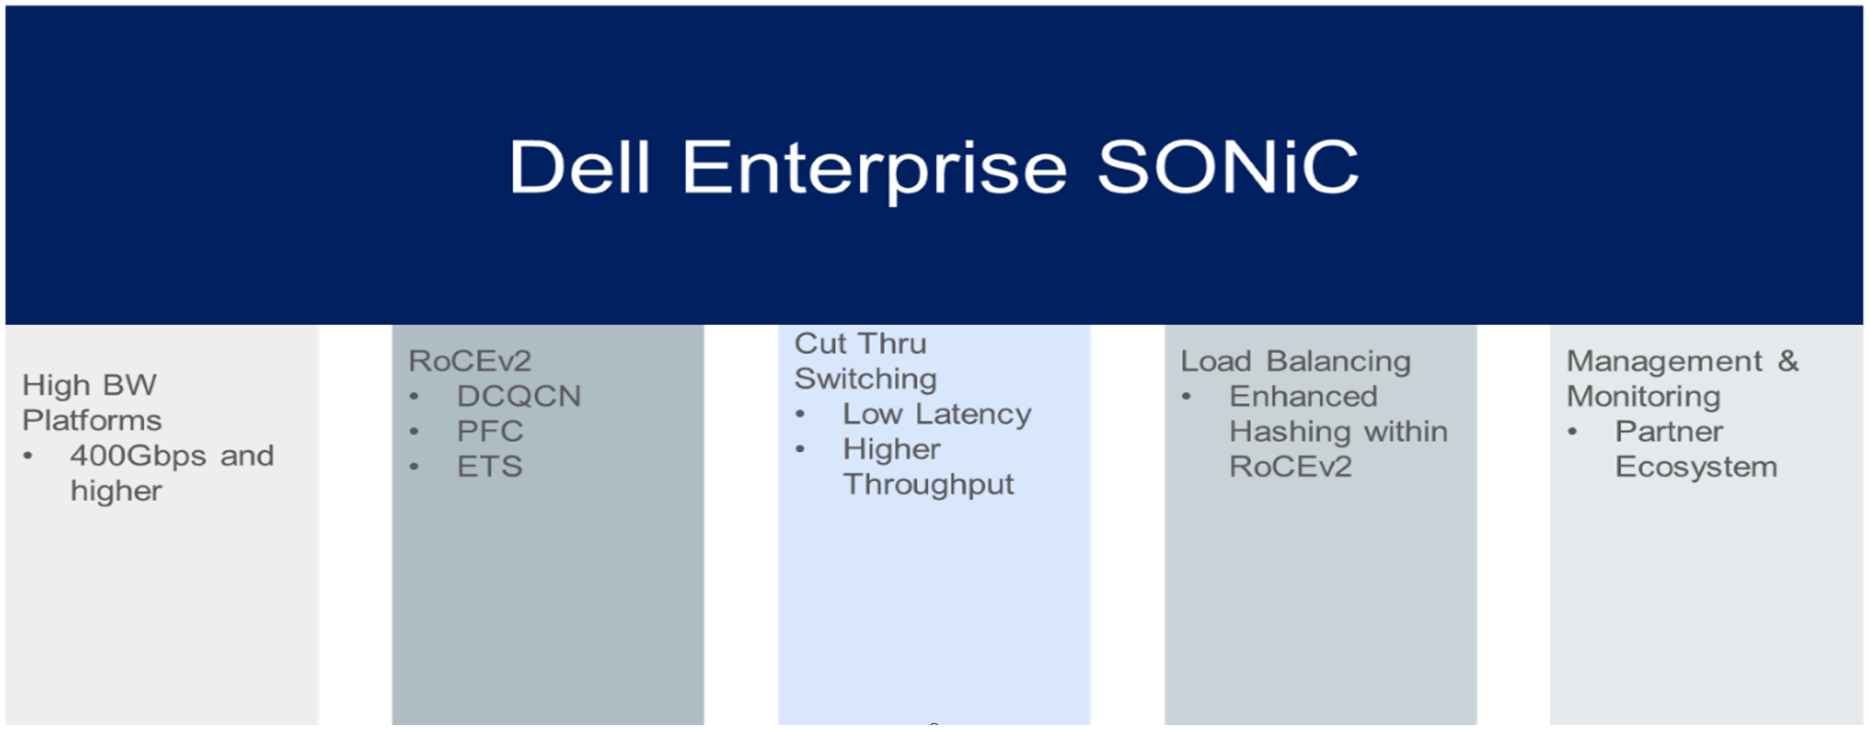 This graphic illustrates the Dell Enterprise SONiC features